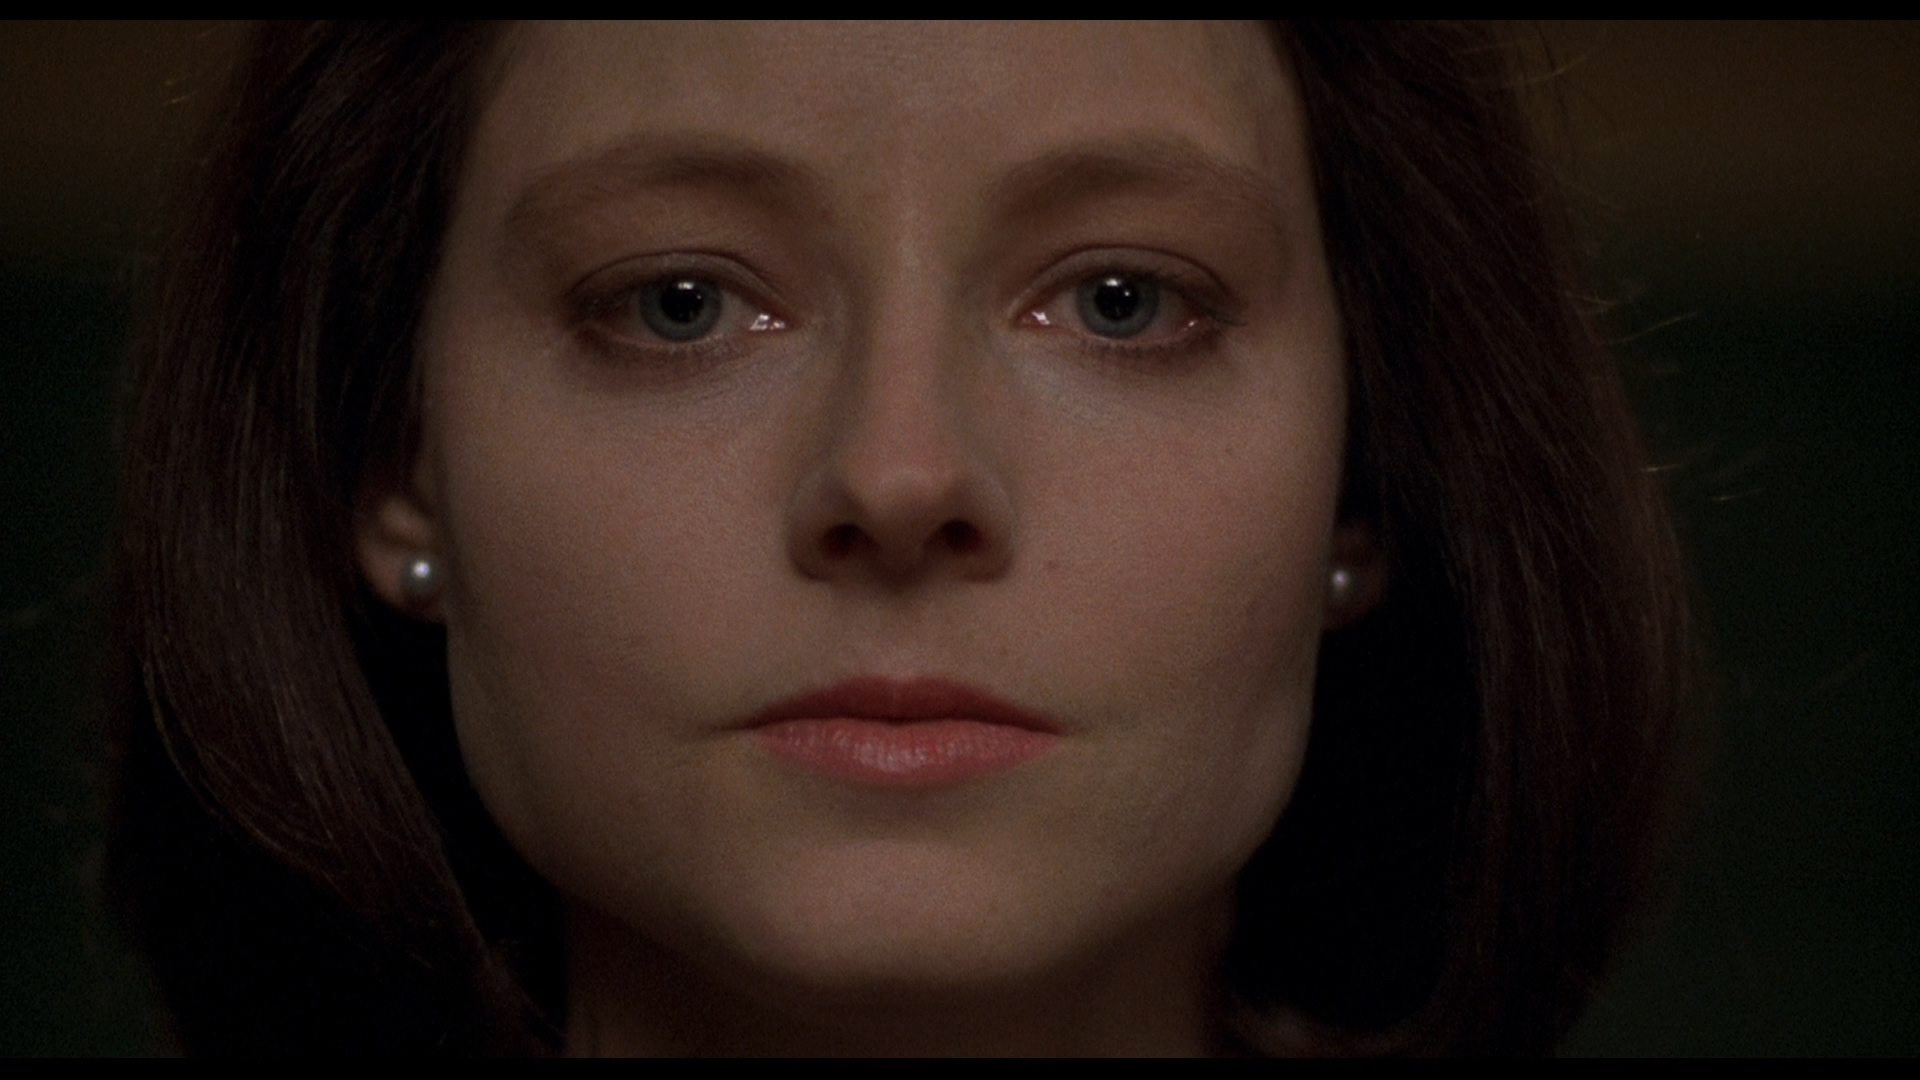 The Silence Of The Lambs Backgrounds, Compatible - PC, Mobile, Gadgets| 1920x1080 px